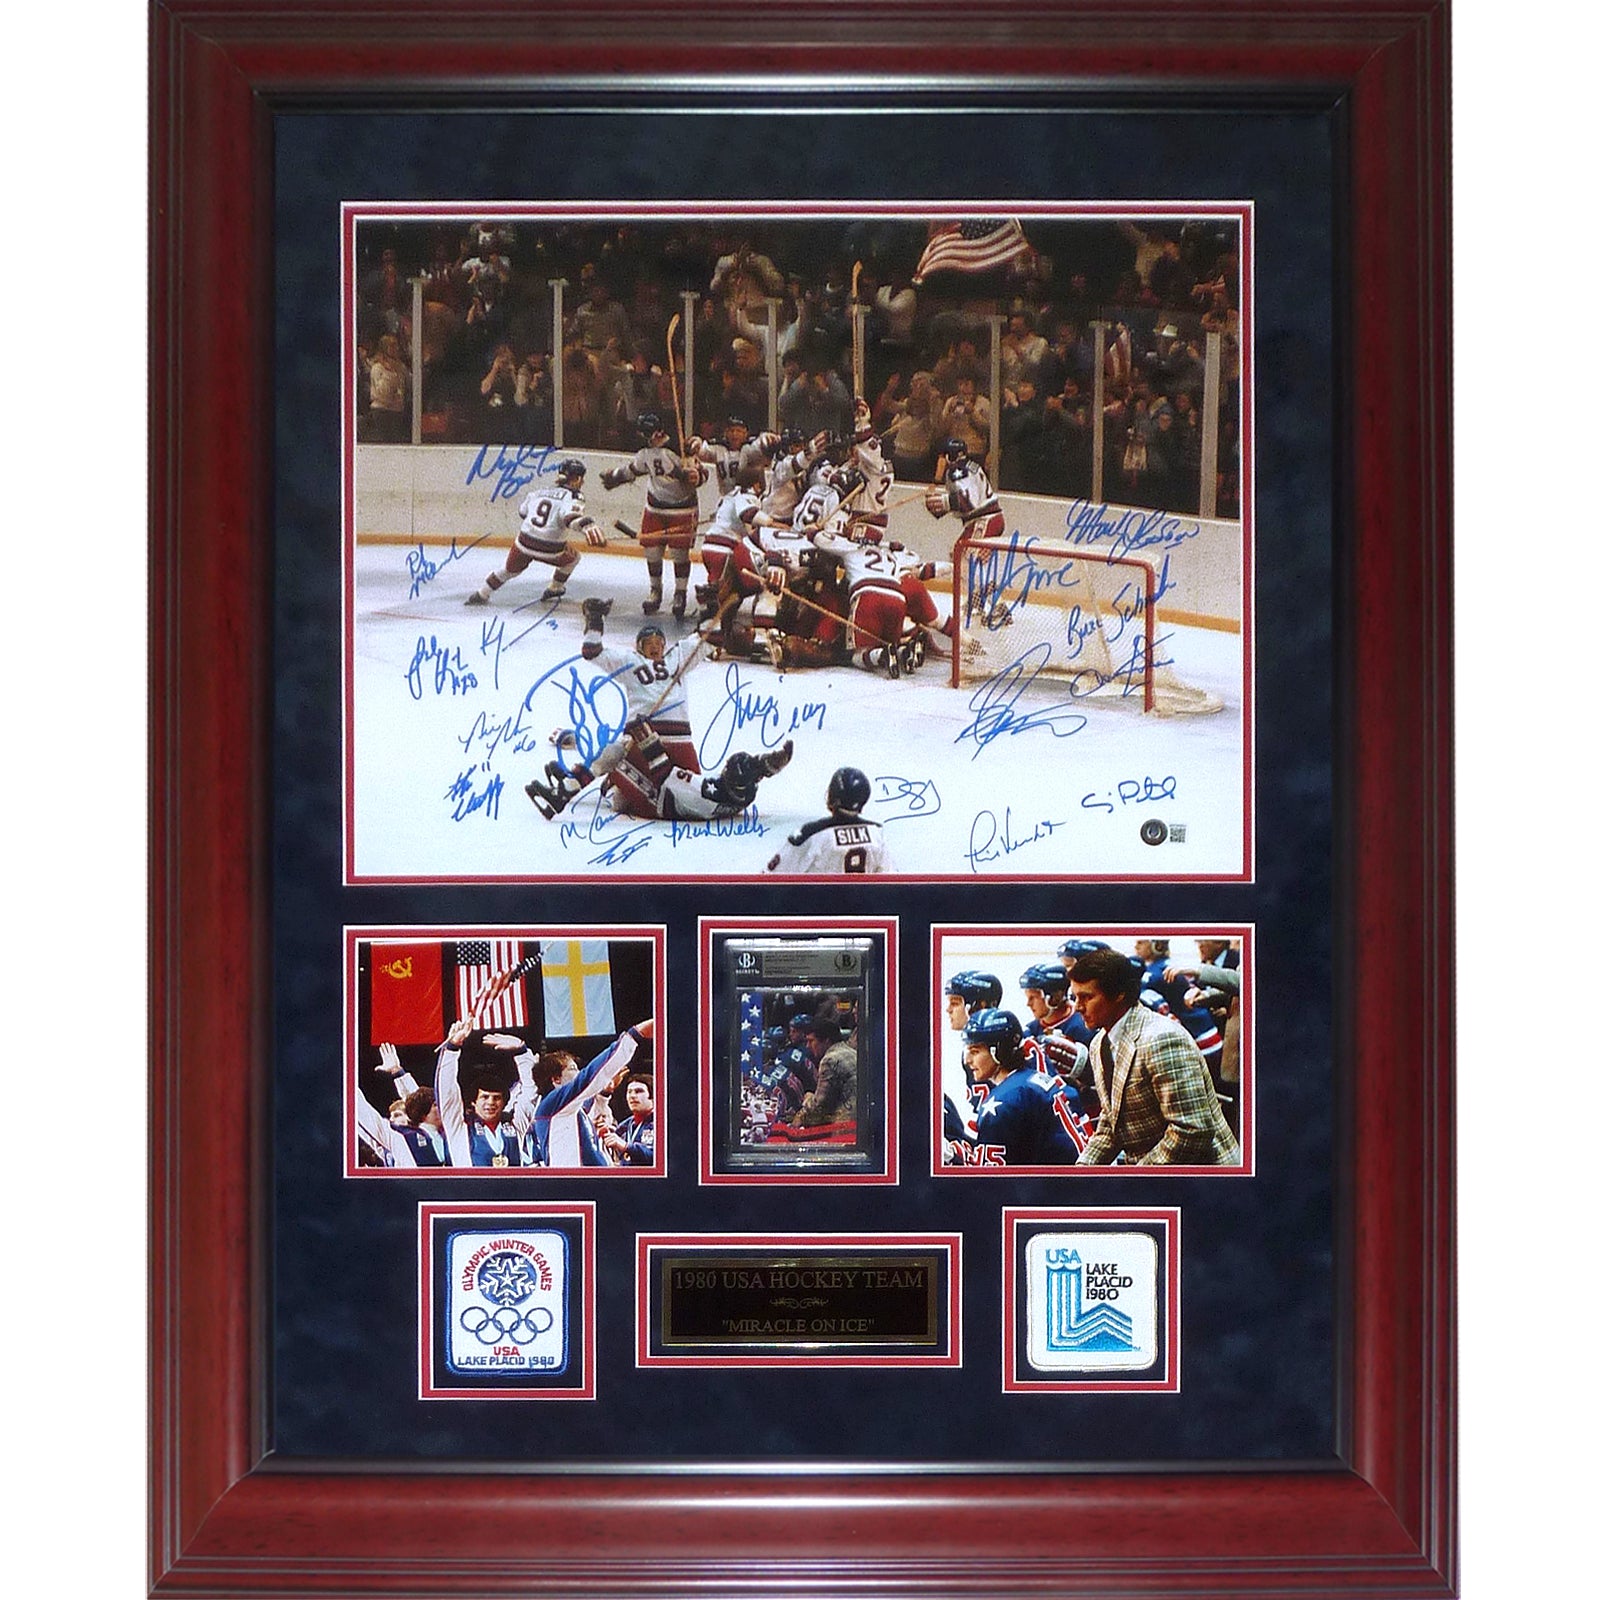 Coach Herb Brooks And 1980 USA Olympic Team Autographed Miracle On Ice Deluxe Framed 16x20 Photo - JSA, Beckett